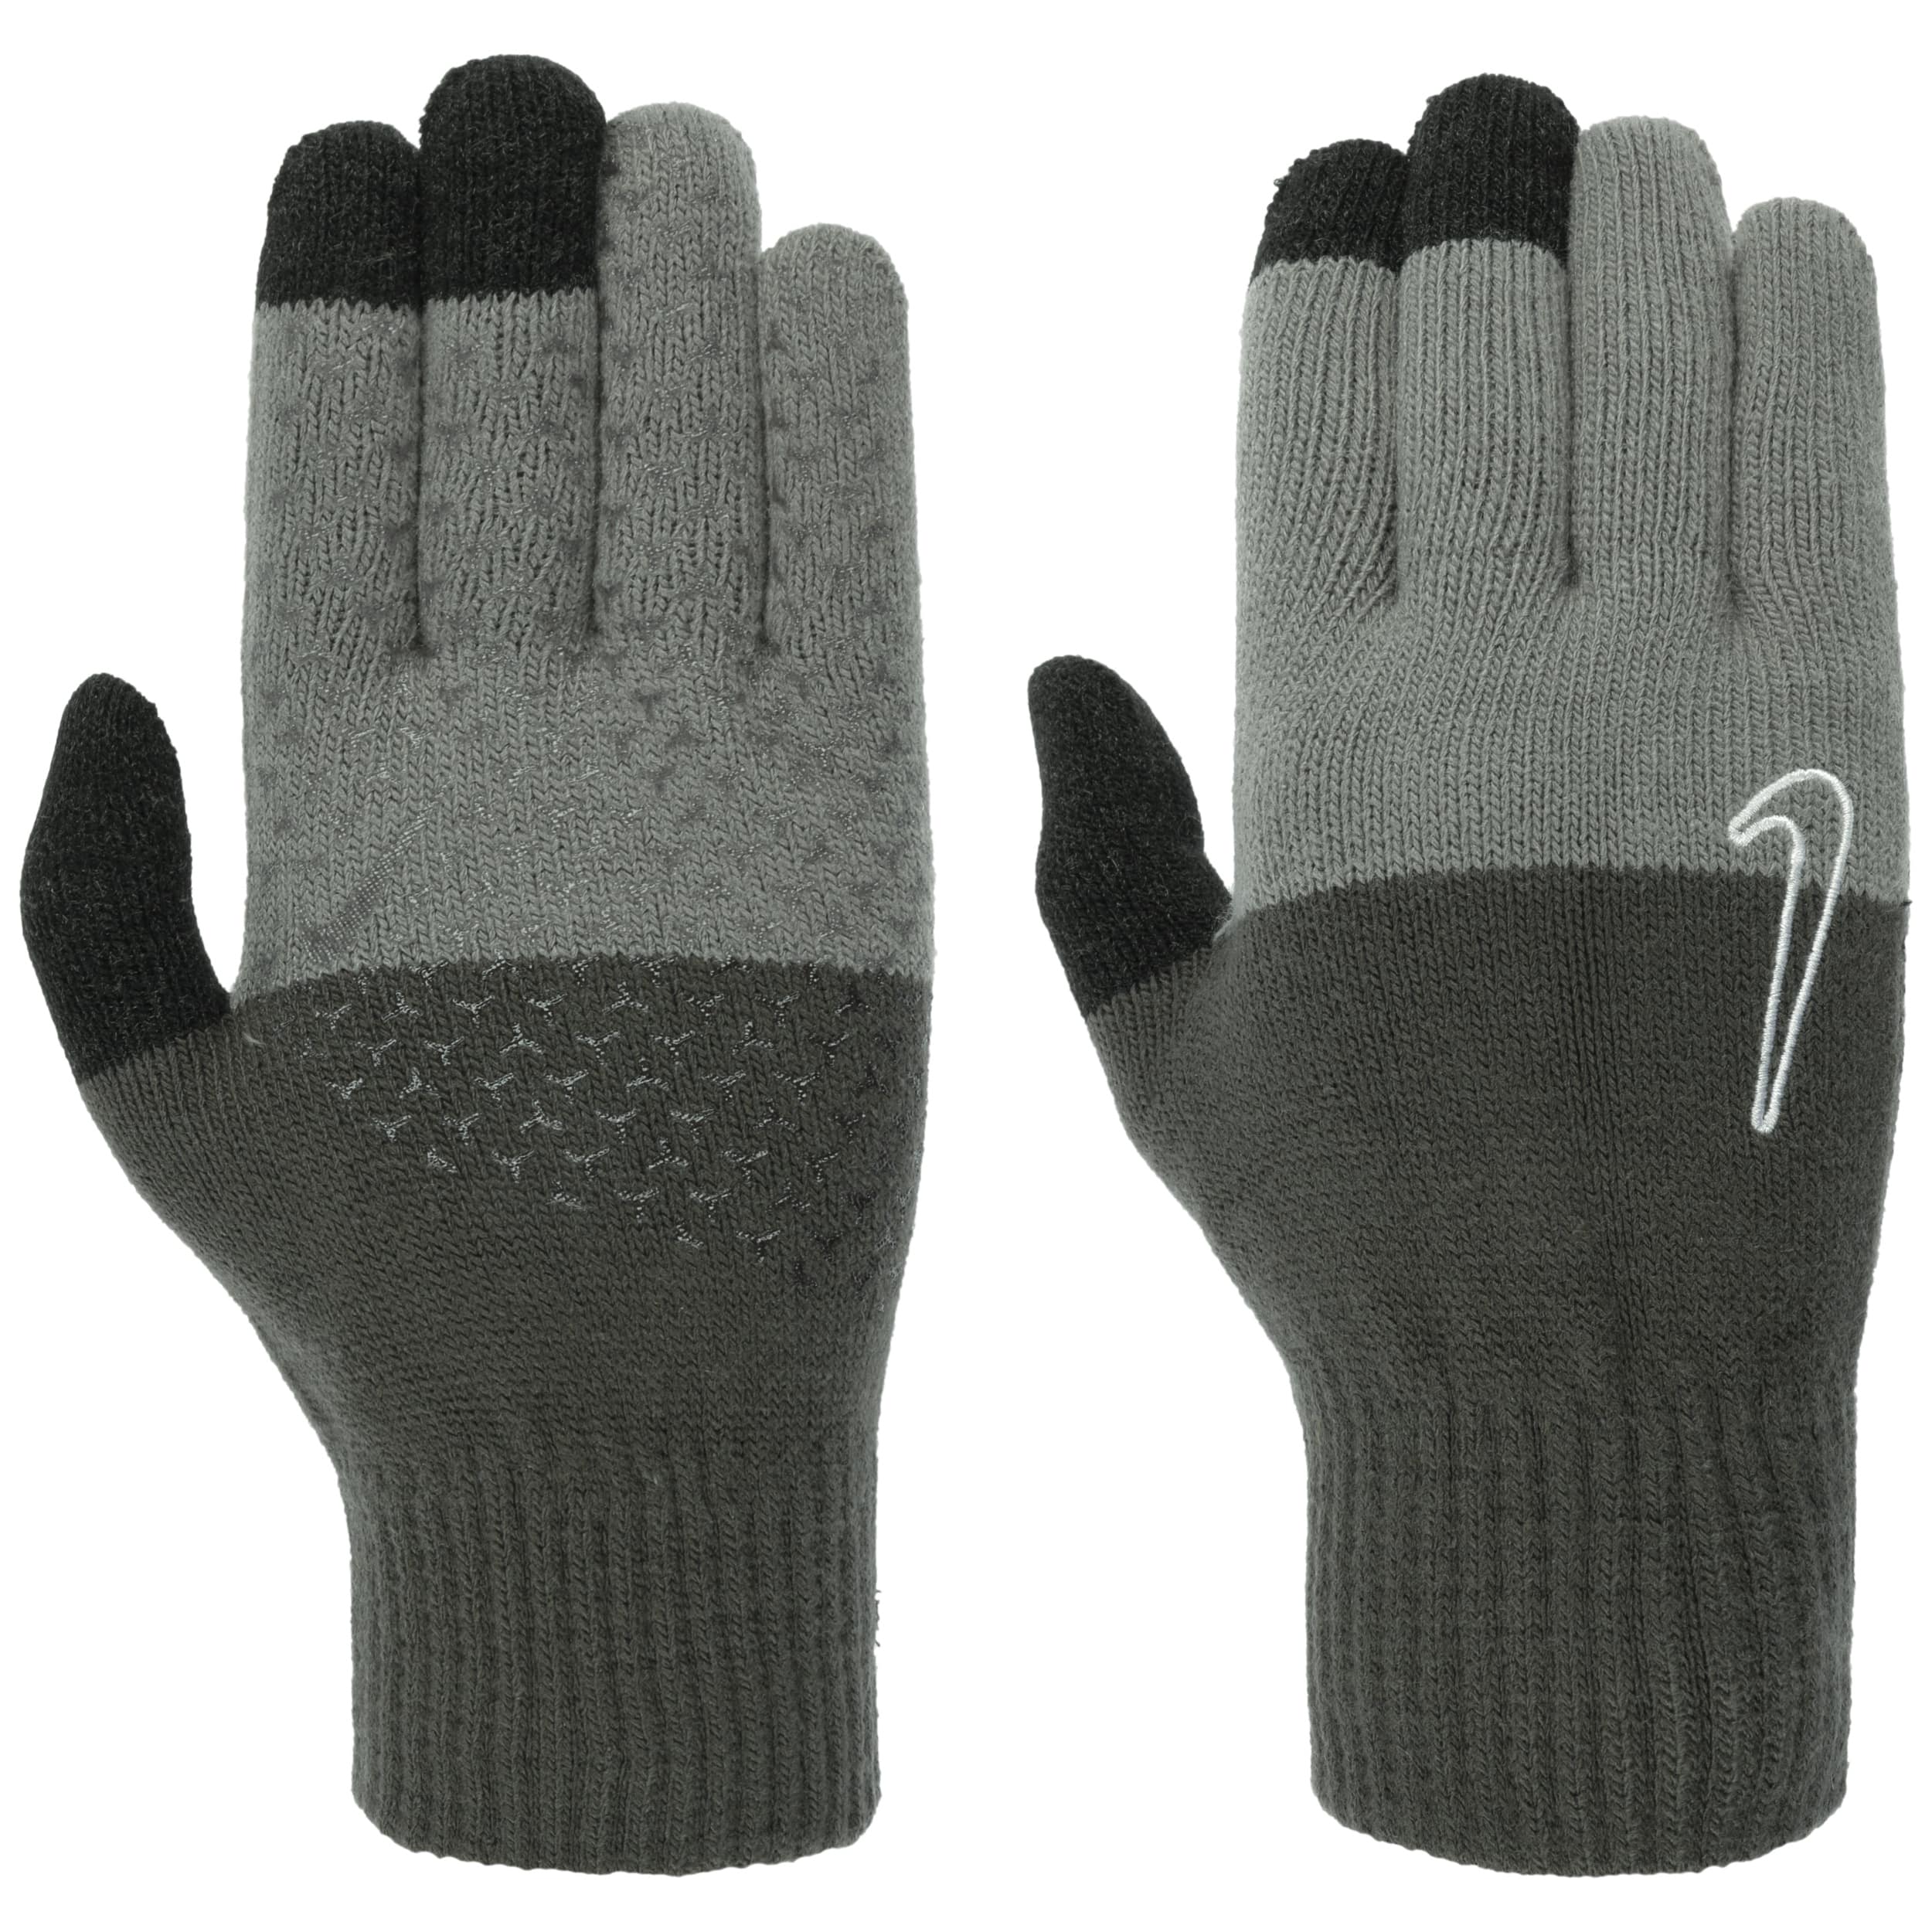 Knit Tech Grip TG 2.0 Graphic Handschuhe by Nike - 25,95 €